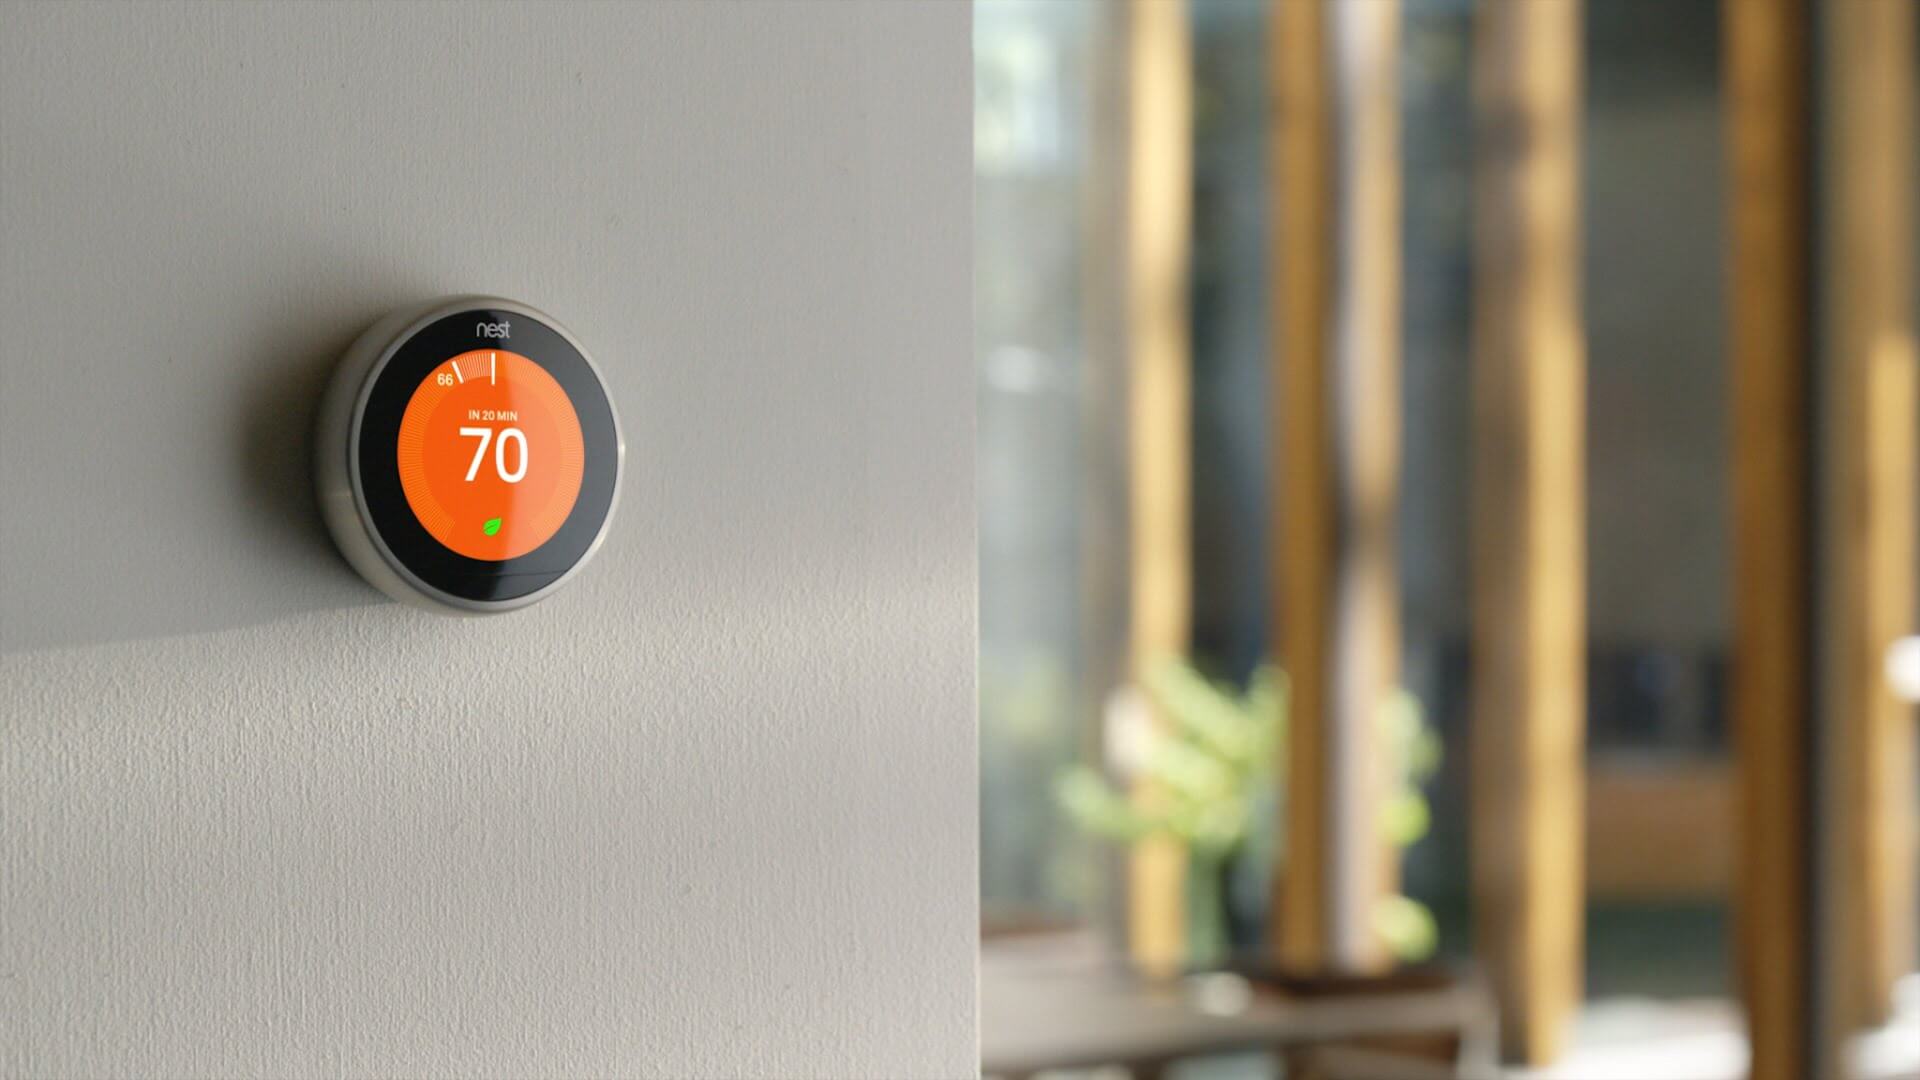 Smart thermostat on a wall showing 70 degrees fahrenheit